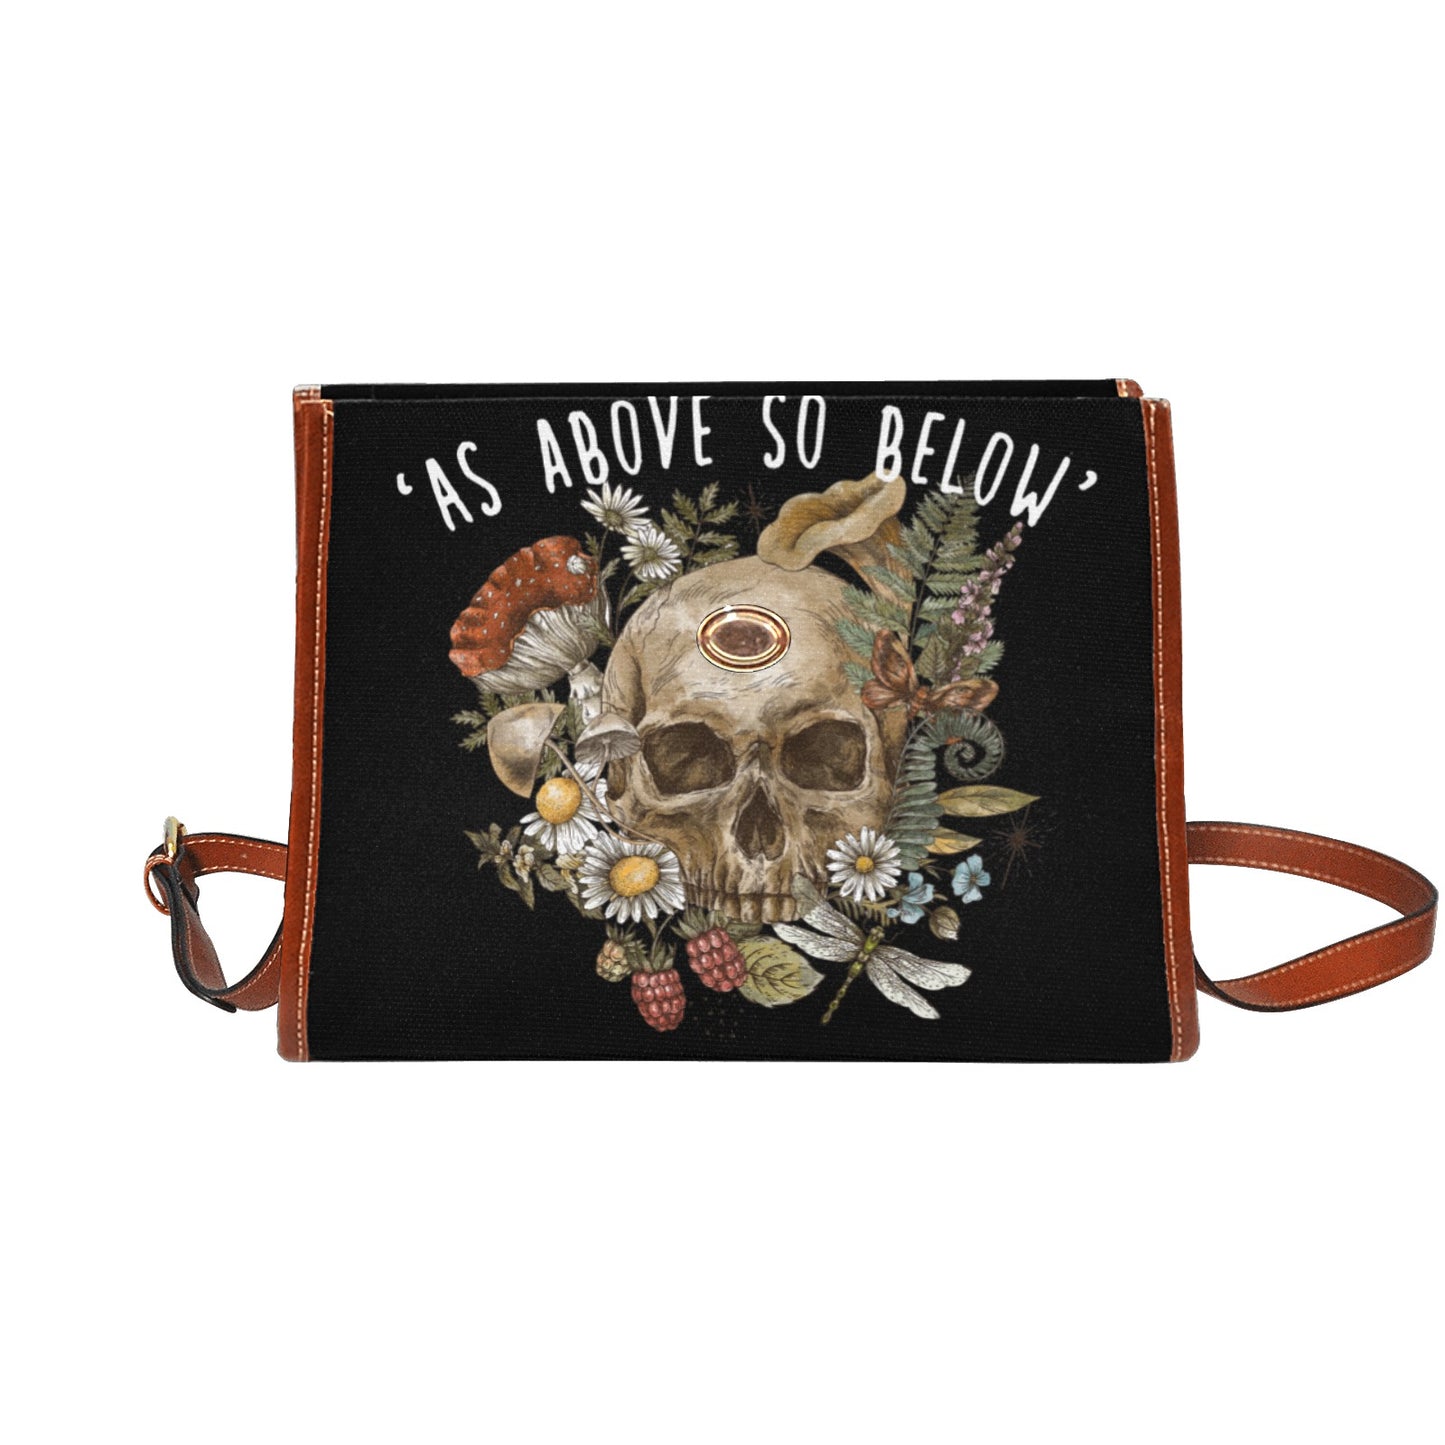 As Above So Below Forest Skull witchy goth Canvas Satchel Bag